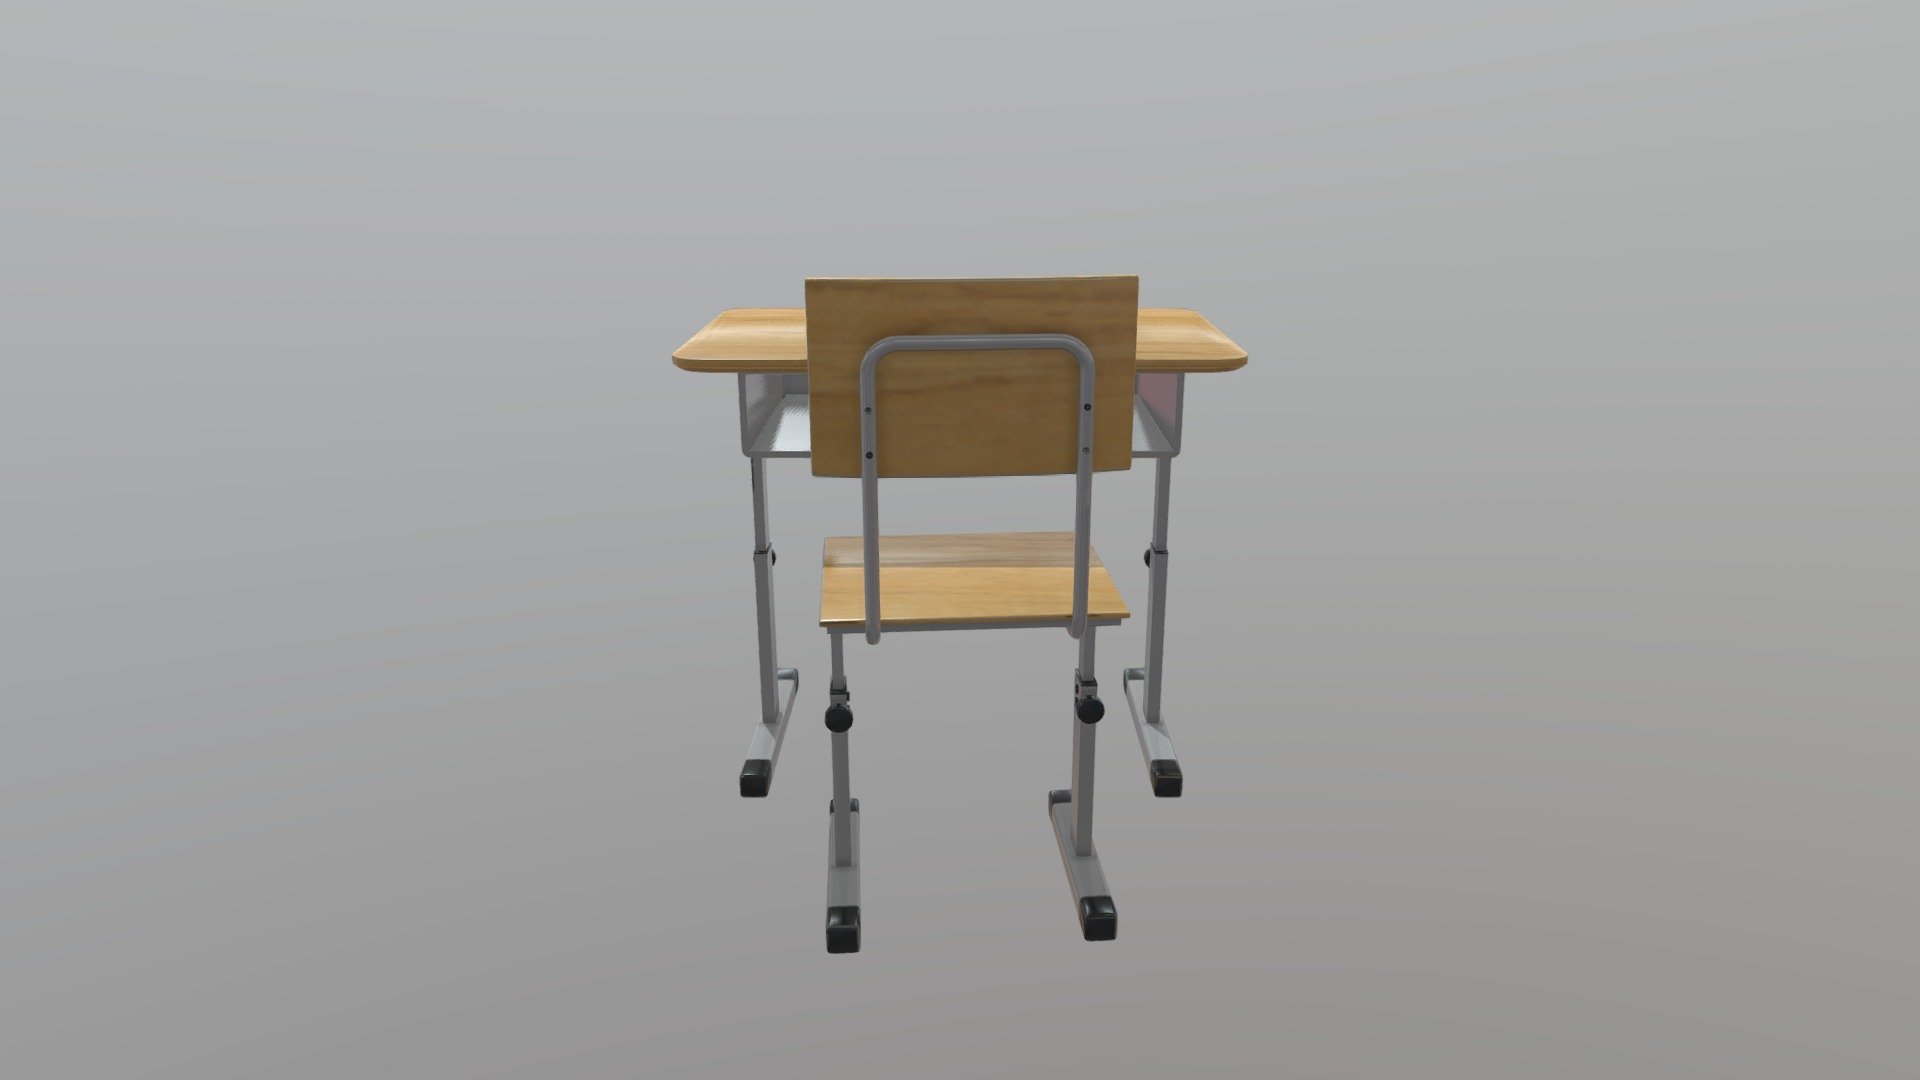 Japanese school table and chair
texture painted in Quixel Mixer
VR, furniture, native 3D Software Blender - Japanese school table and chair - 3D model by serriallenn 3d model